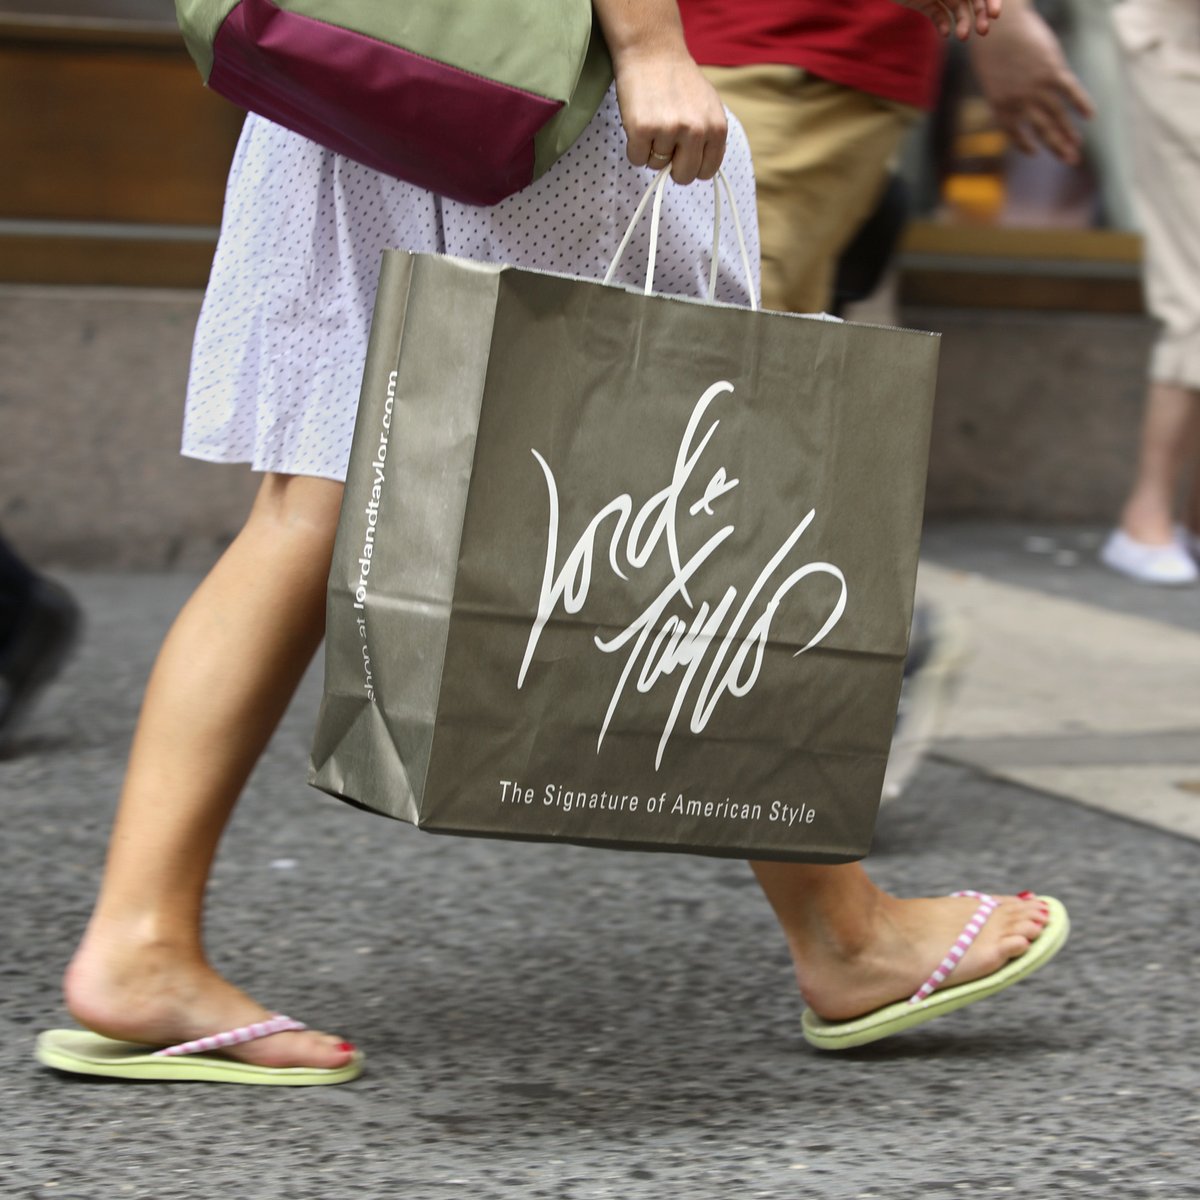 Lord & Taylor, under owner Le Tote, opens SoHo holiday pop-up shop